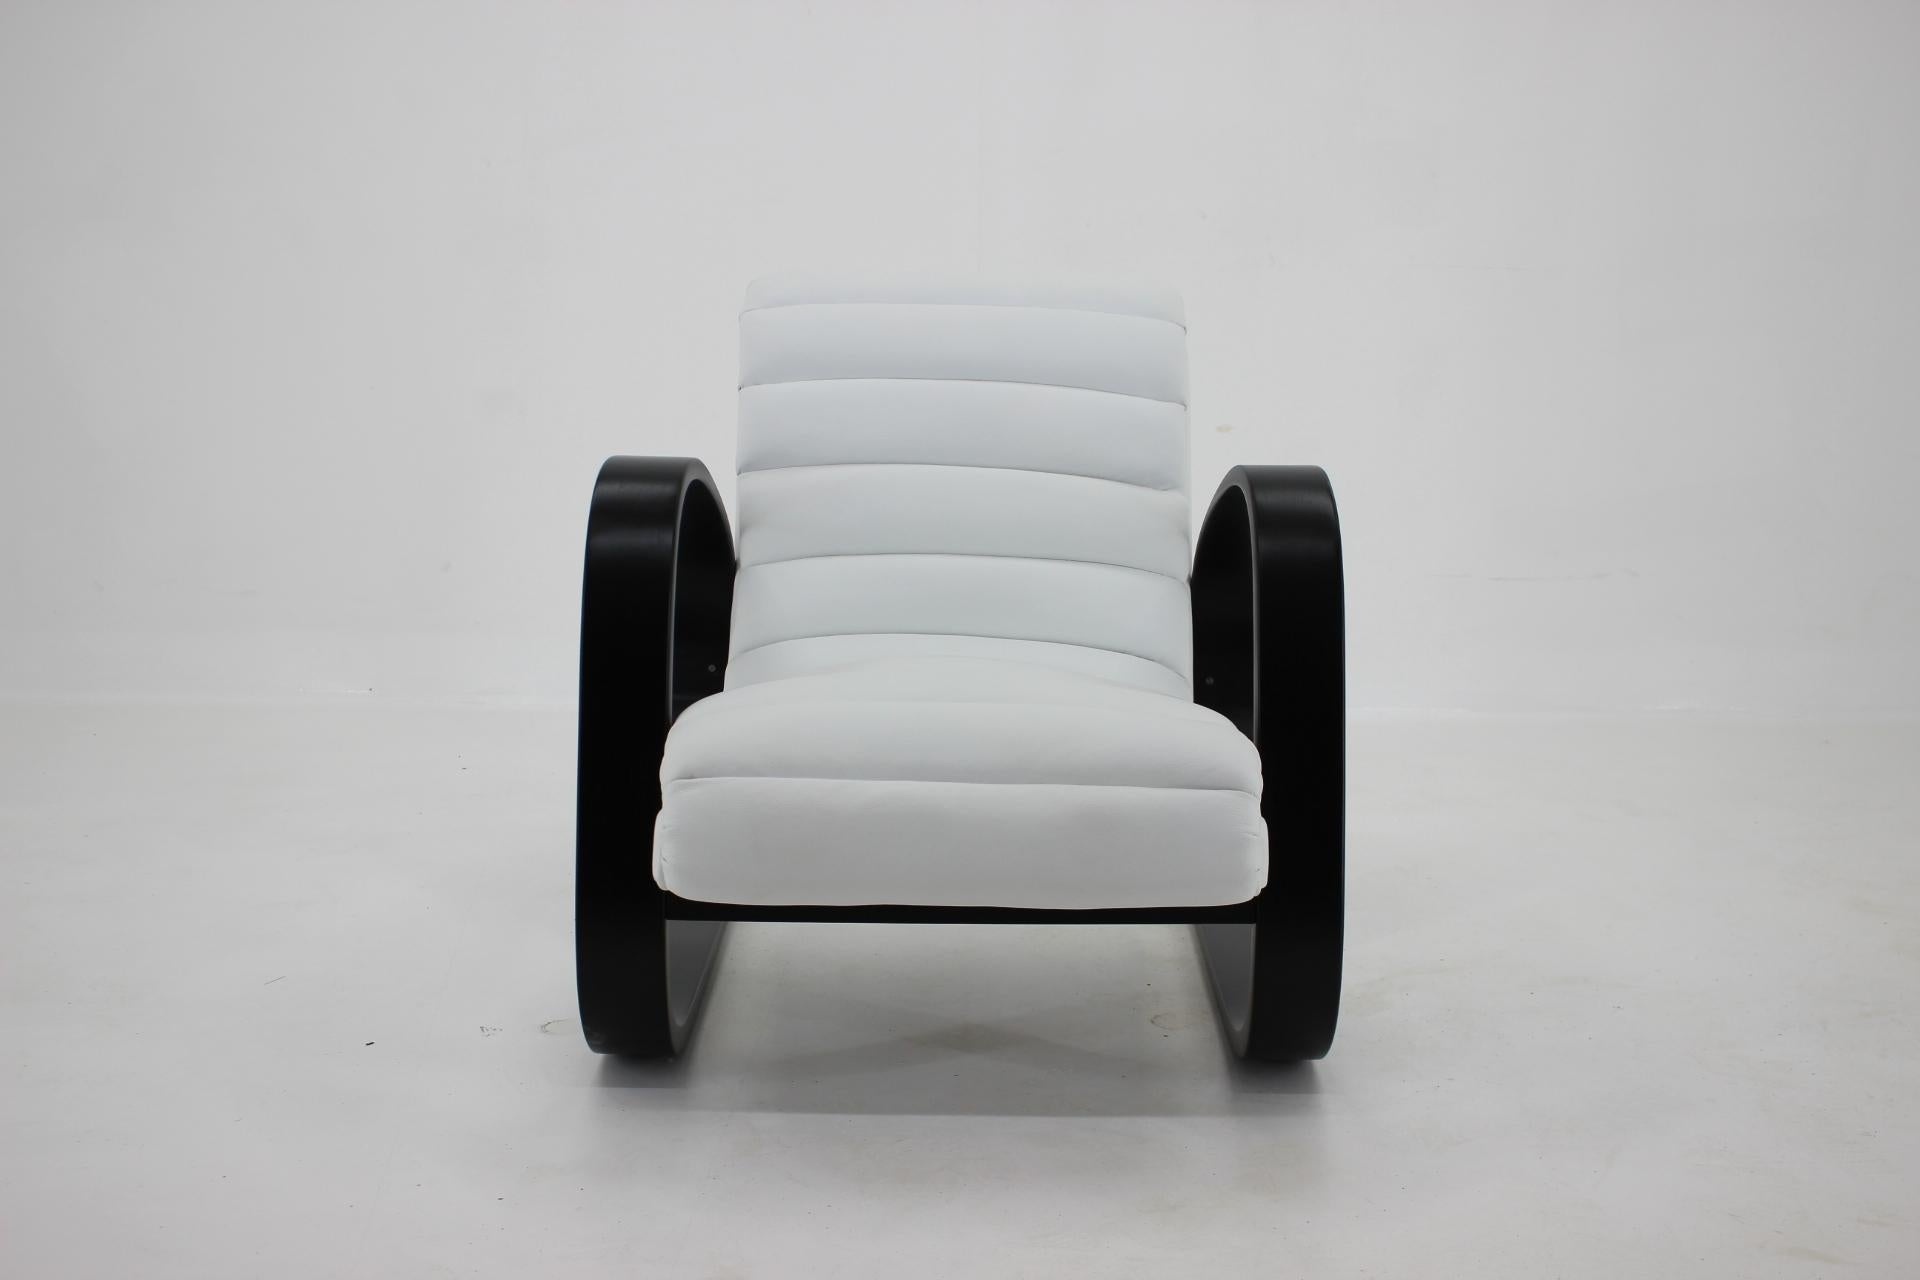 - Newly upholstered in white leather 
- Wooden parts have been lacquered in black mat finish.